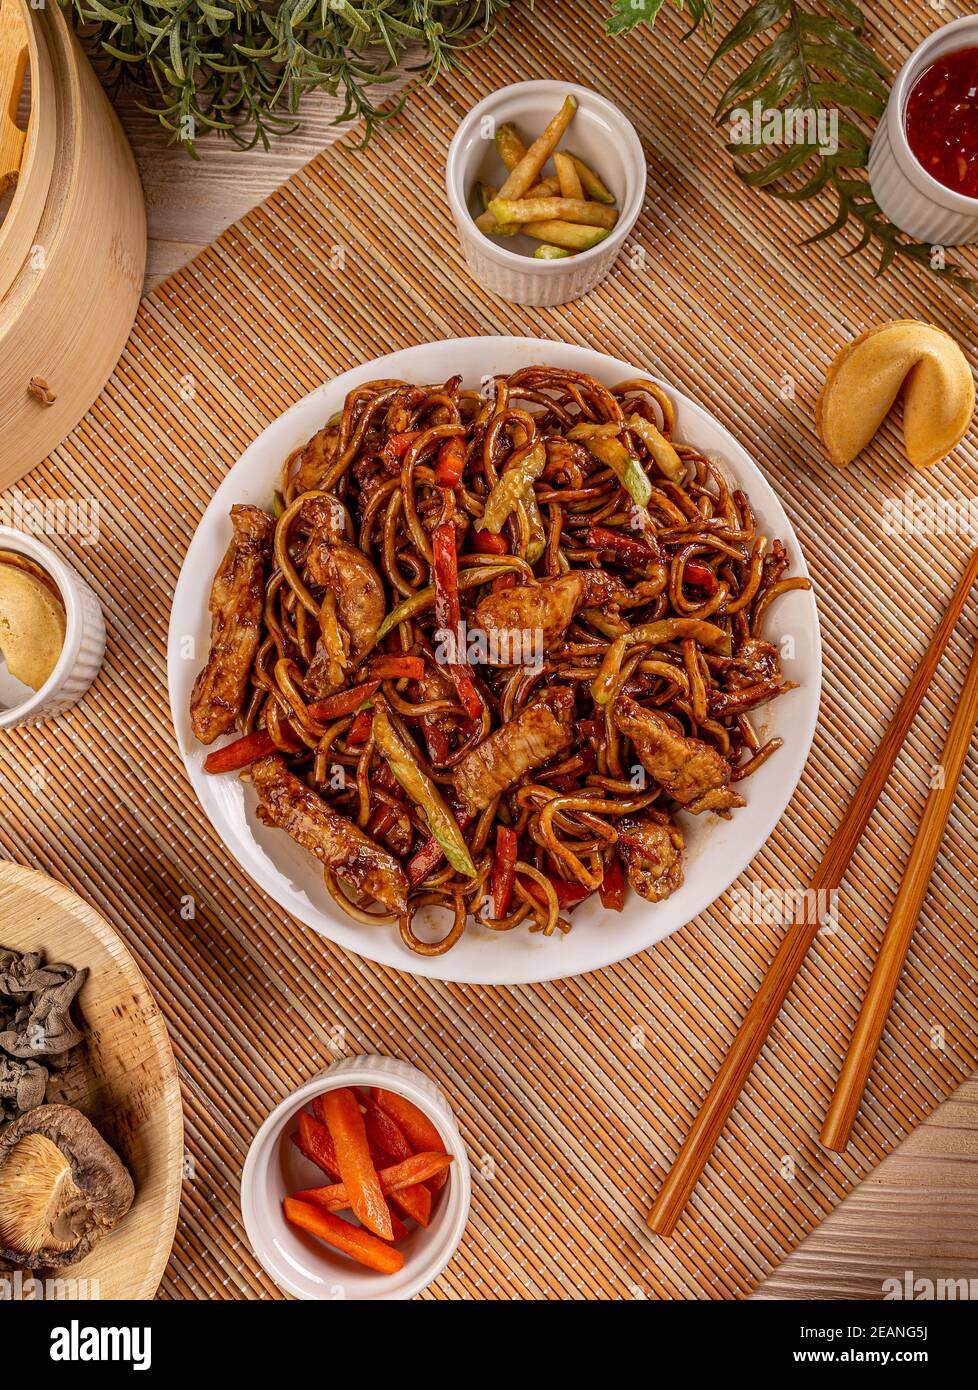 Chicken in spicy brown sauce Stock Photo